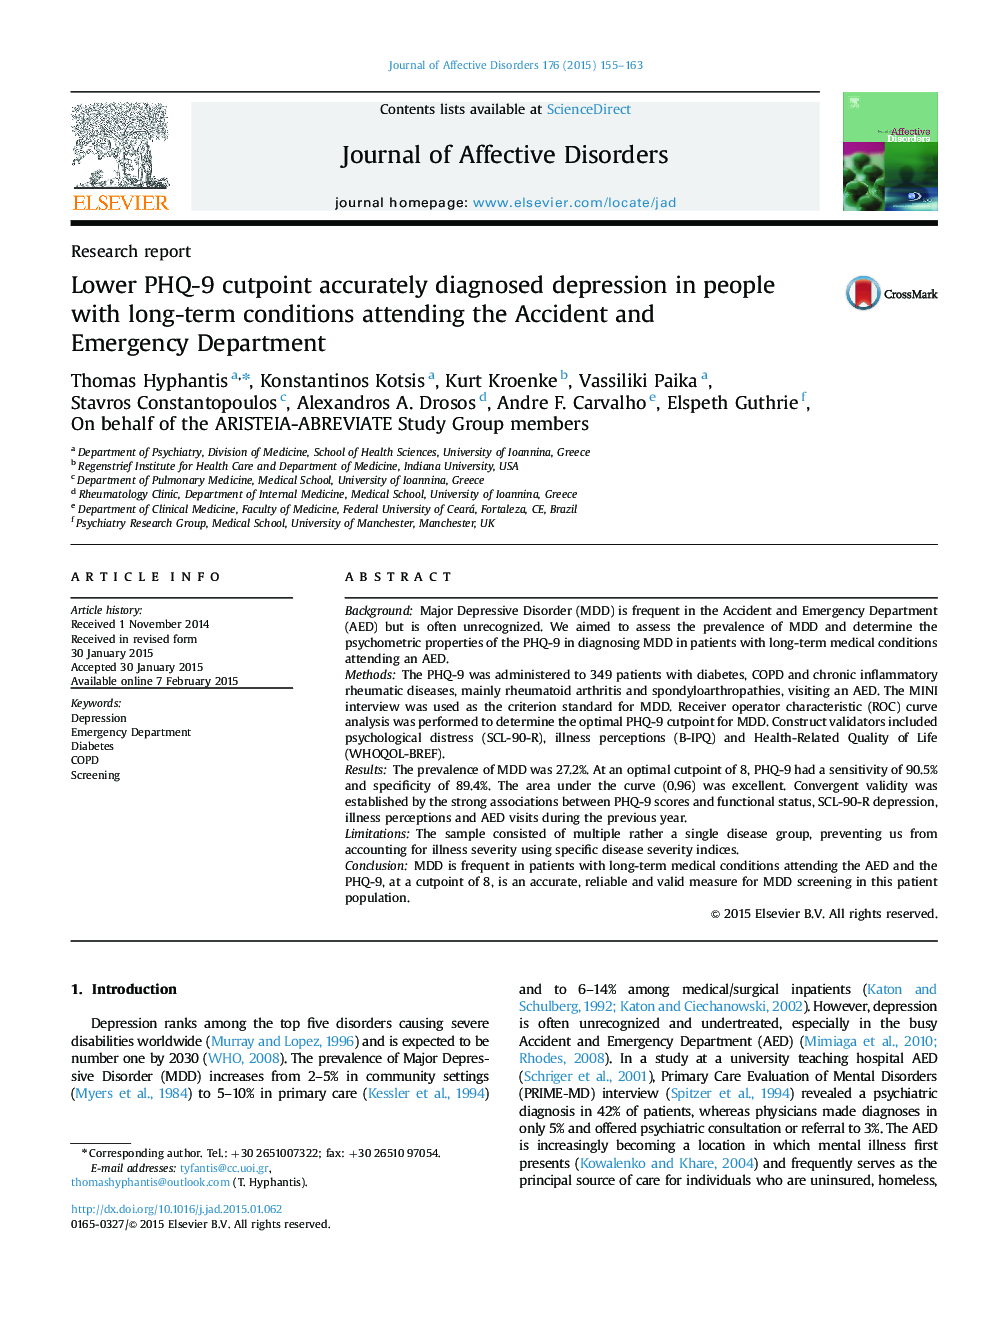 Lower PHQ-9 cutpoint accurately diagnosed depression in people with long-term conditions attending the Accident and Emergency Department